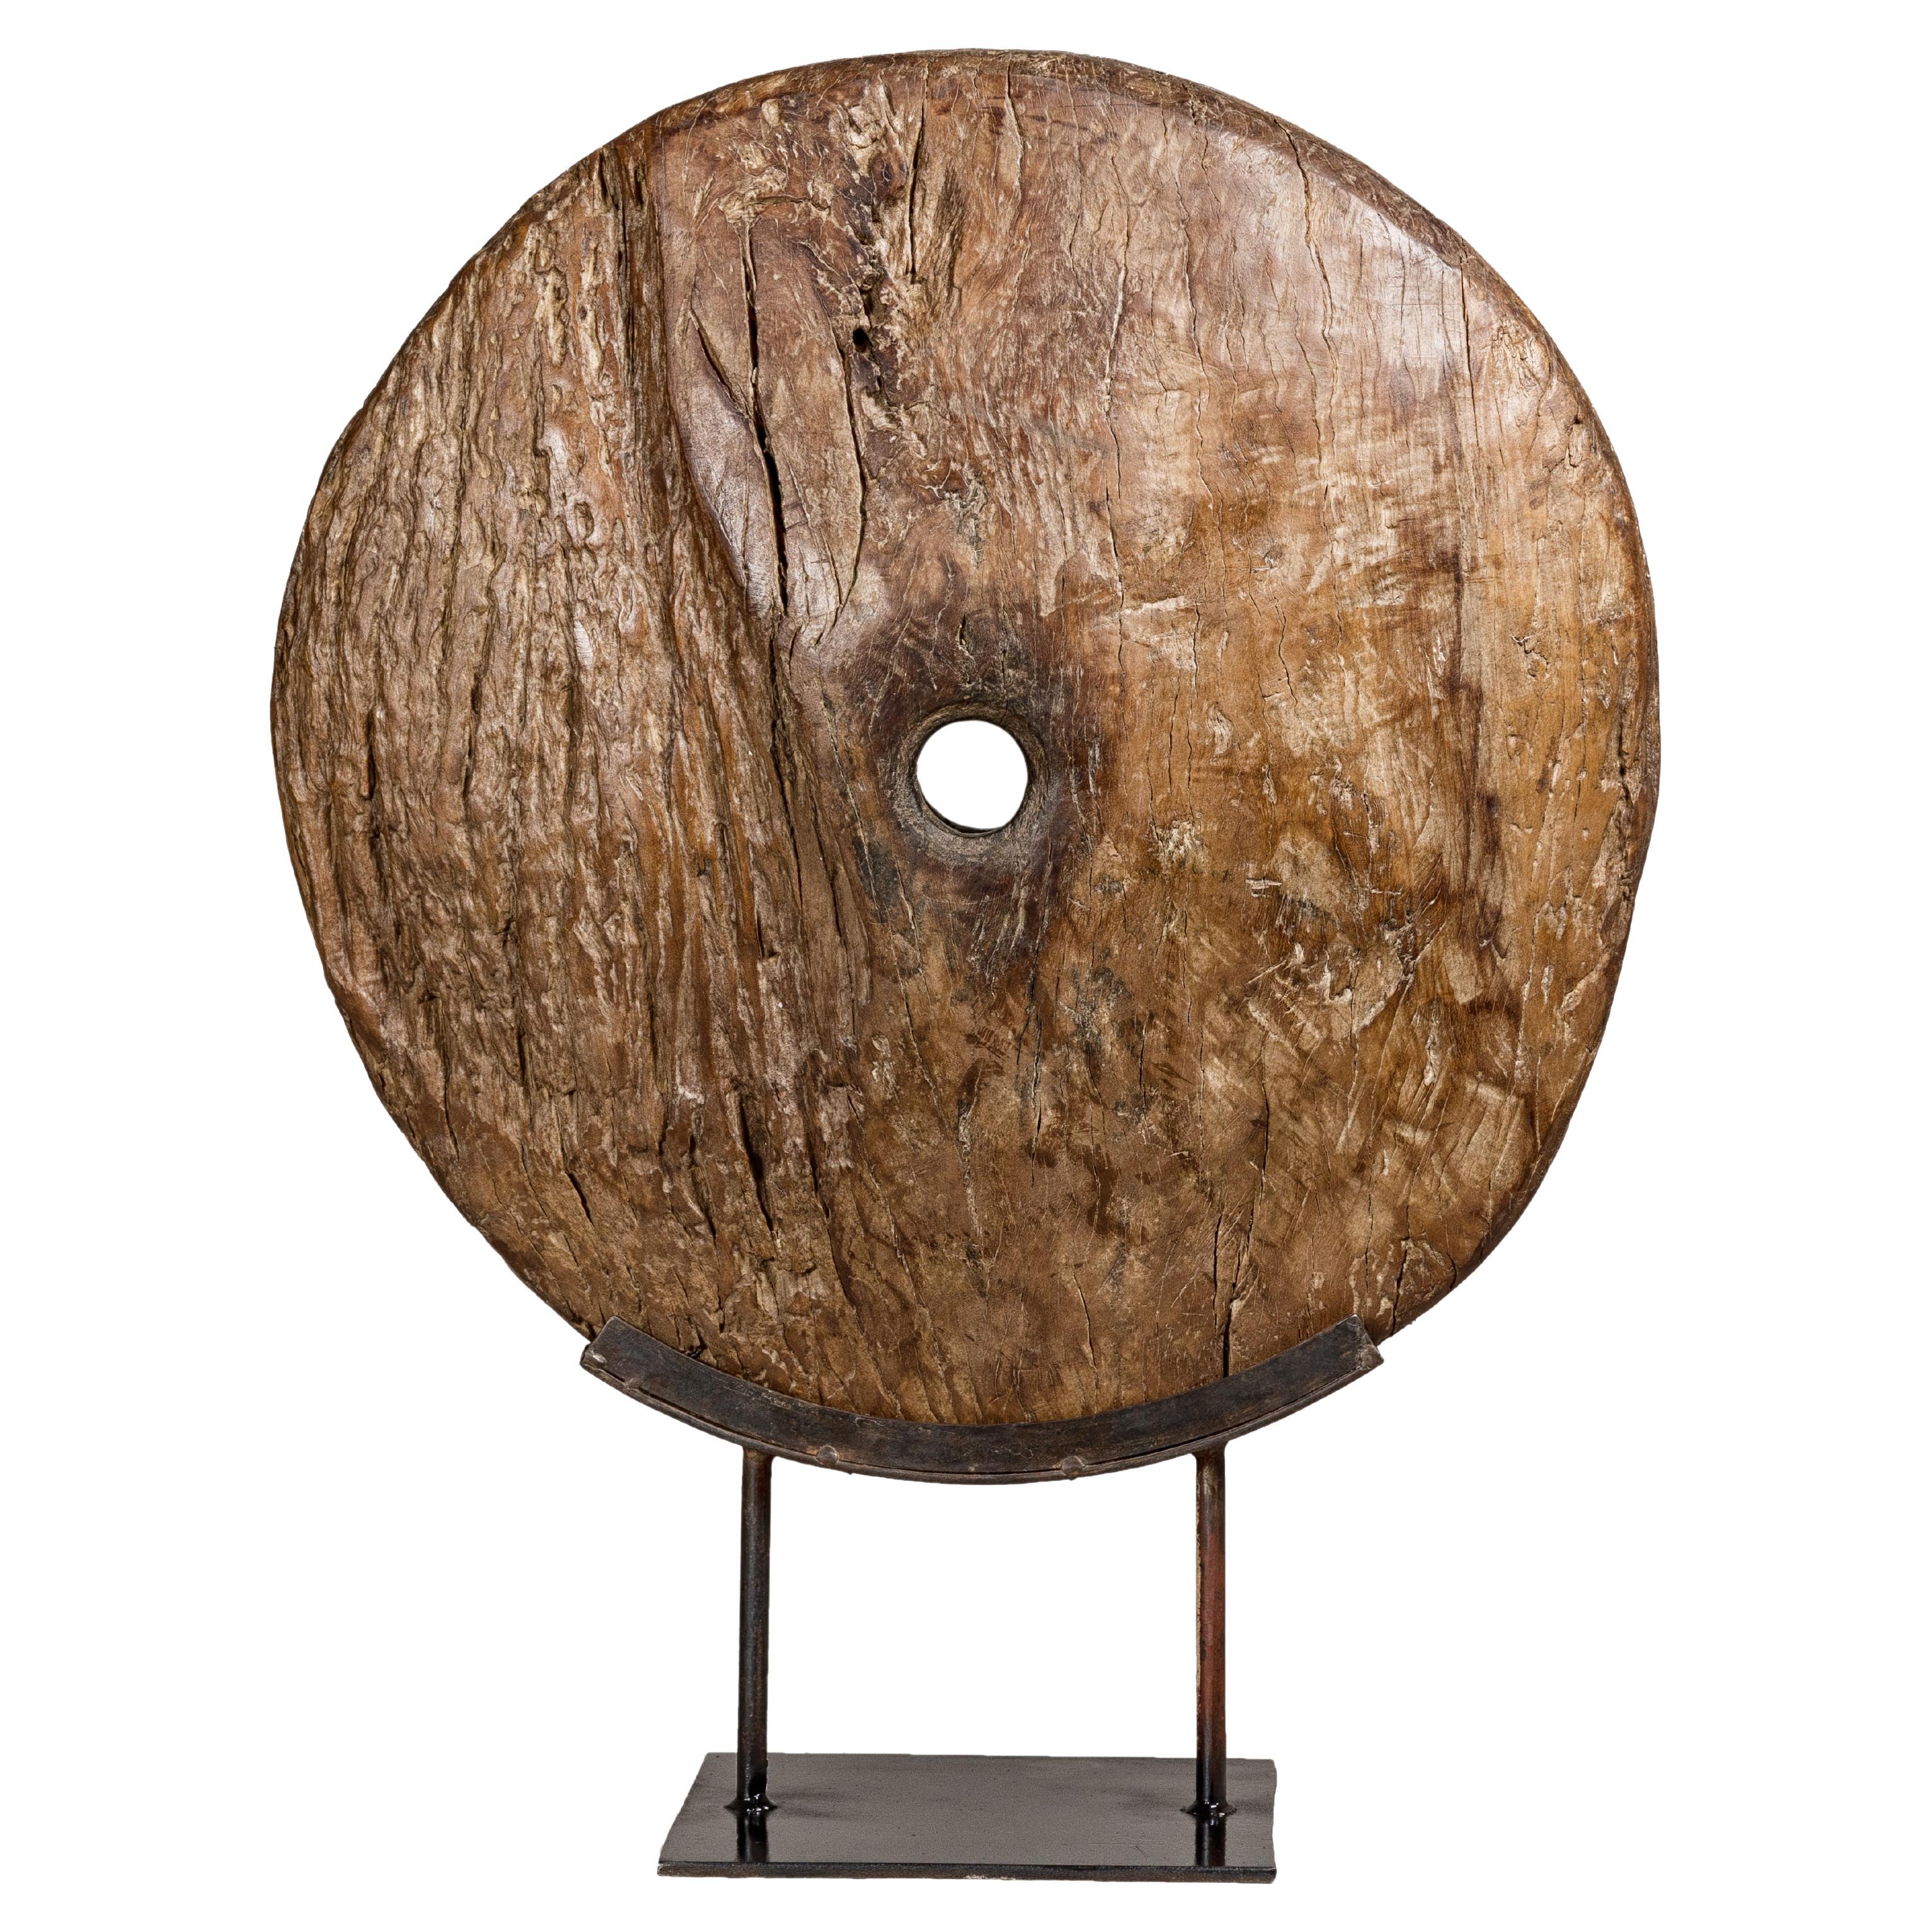  Ancient Cart Wheel Mounted on Black Lacquer Base with Rustic Character